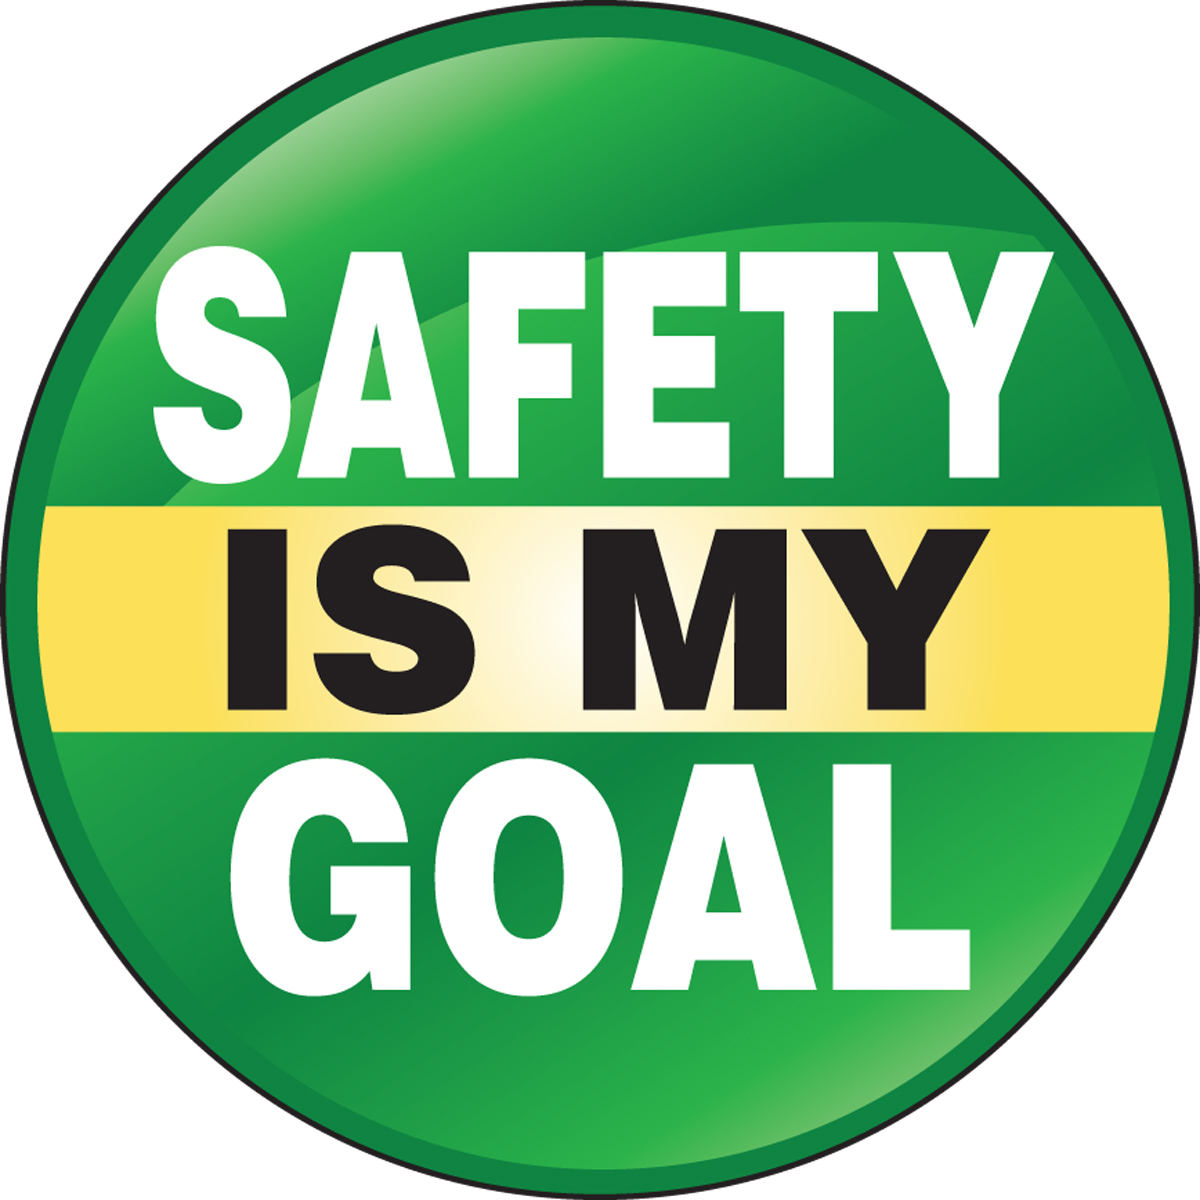 SAFETY IS MY GOAL